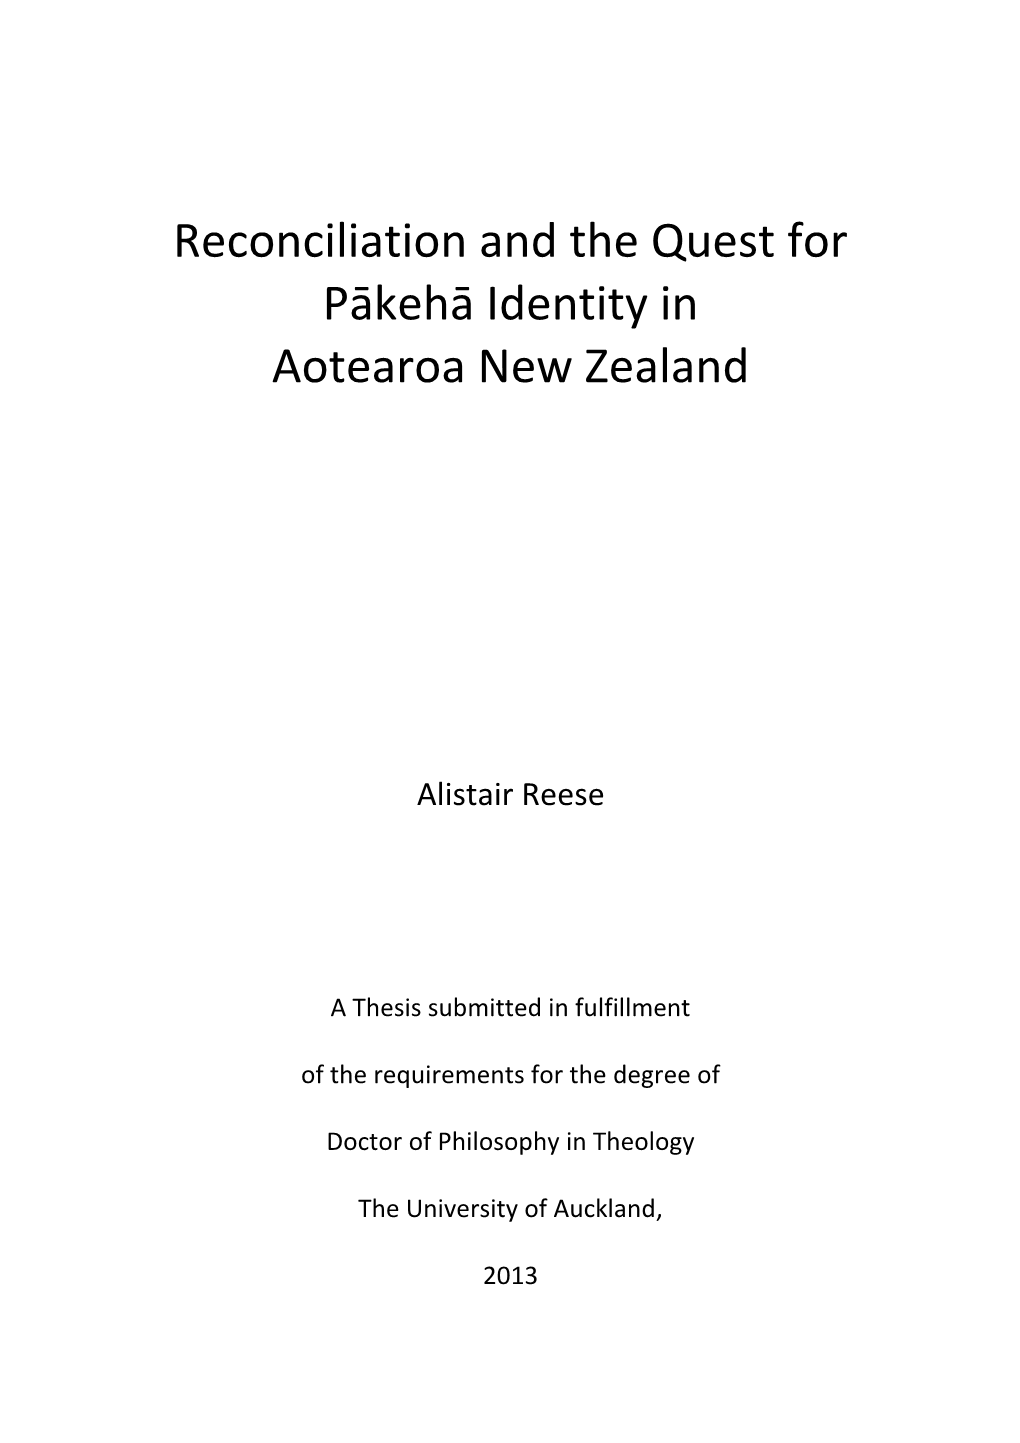 Reconciliation and the Quest for Pākehā Identity in Aotearoa New Zealand